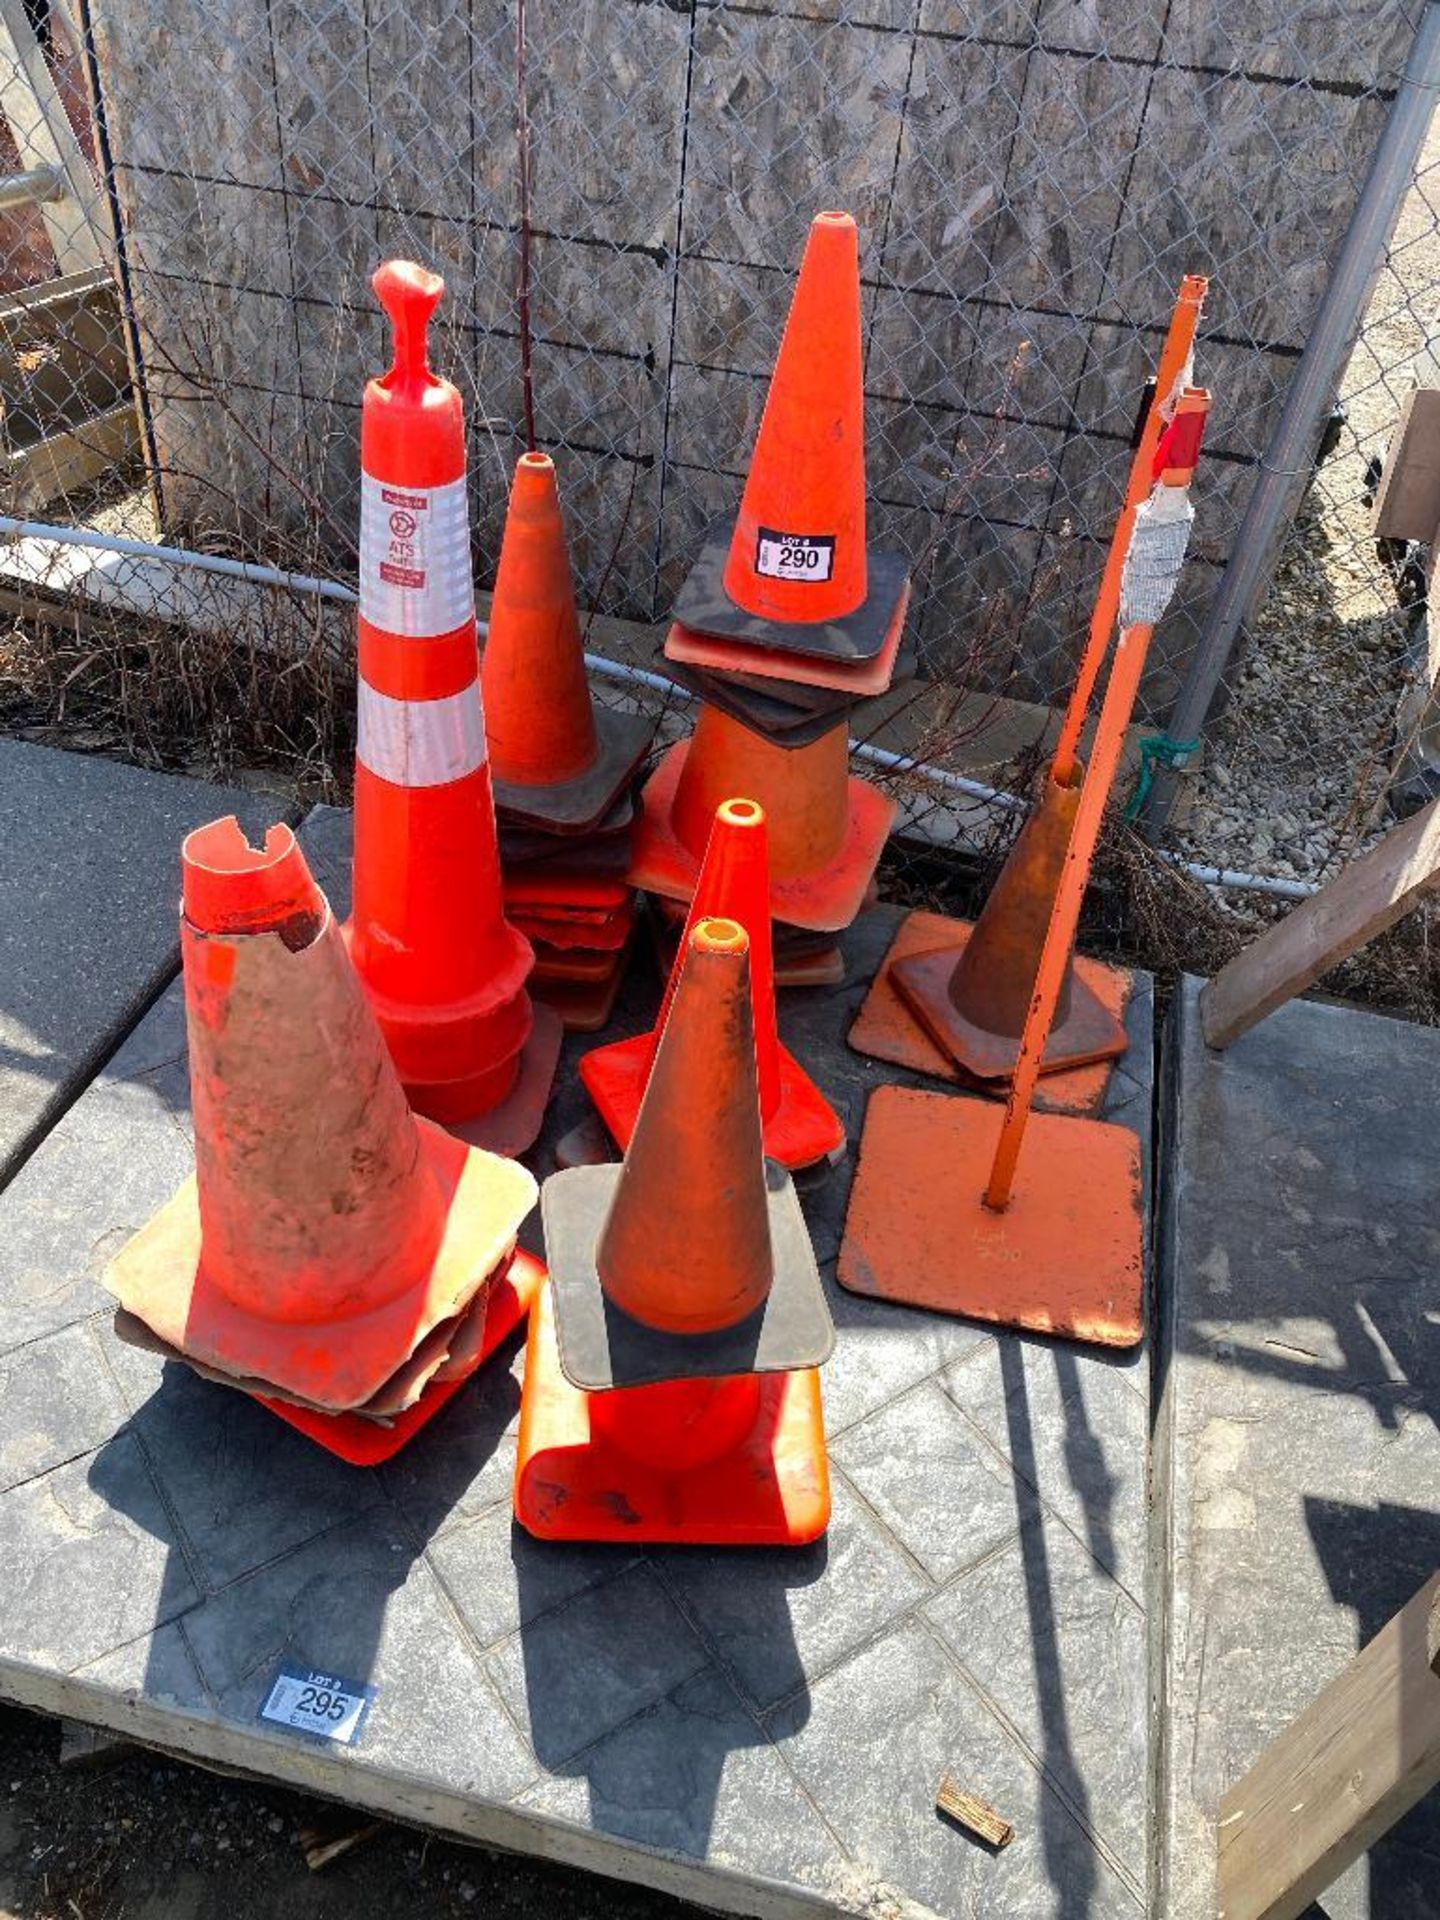 Lot of Asst. Traffic Cones. - Image 3 of 3